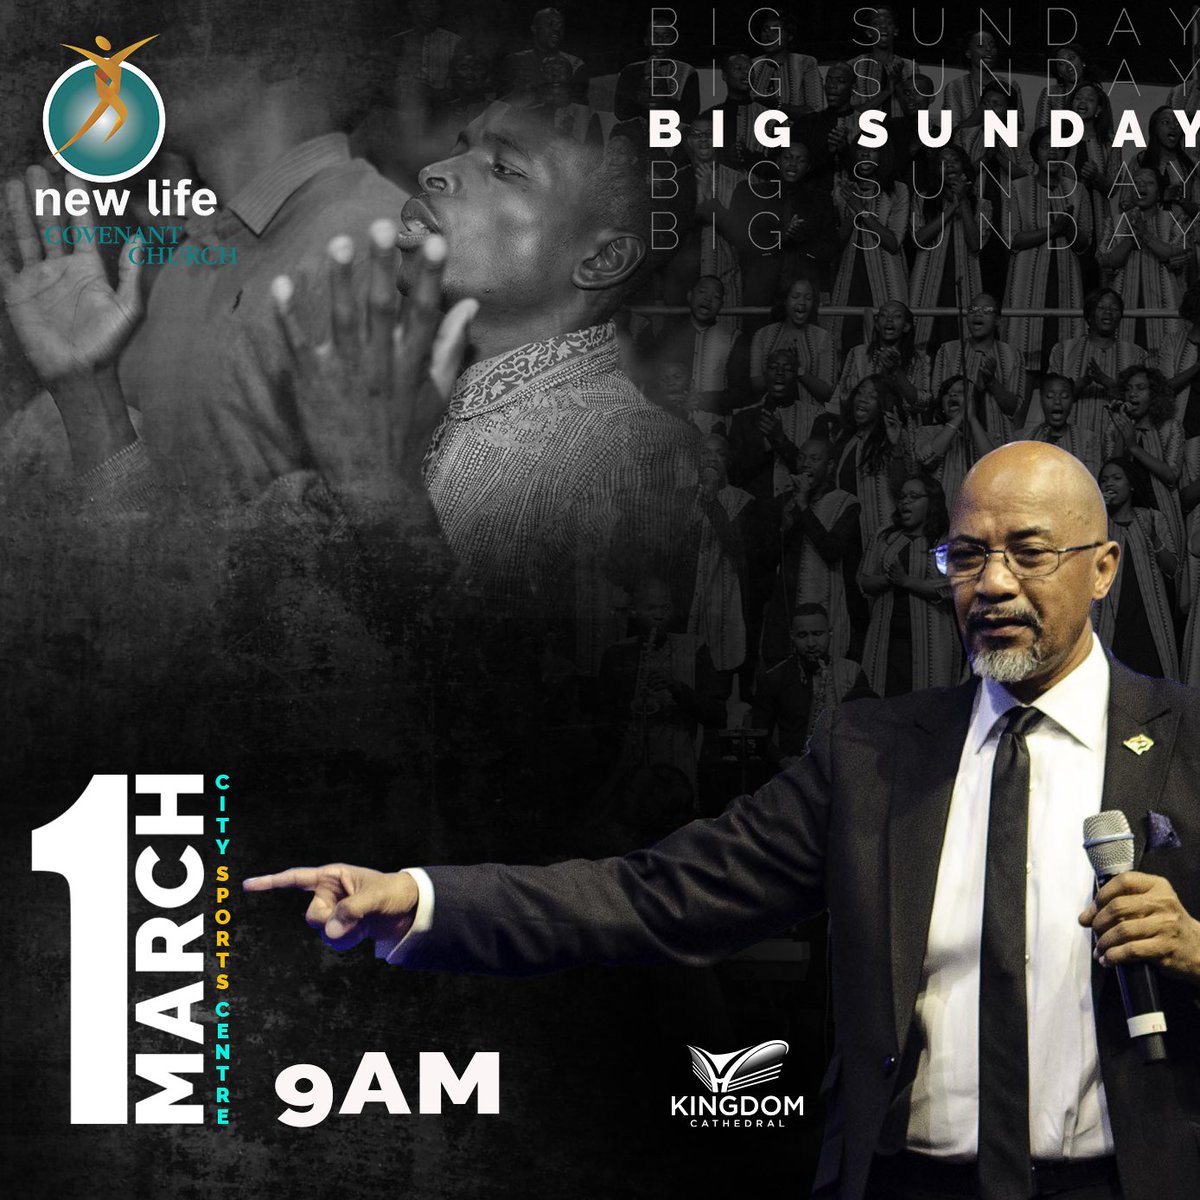 Don't miss our first Big Sunday of the year at City Sports Centre in Harare, on the first of March 2020 starting at 9am. Remember to bring a friend. #NLCC #Jabula #KingdomCathedral #BigSunday